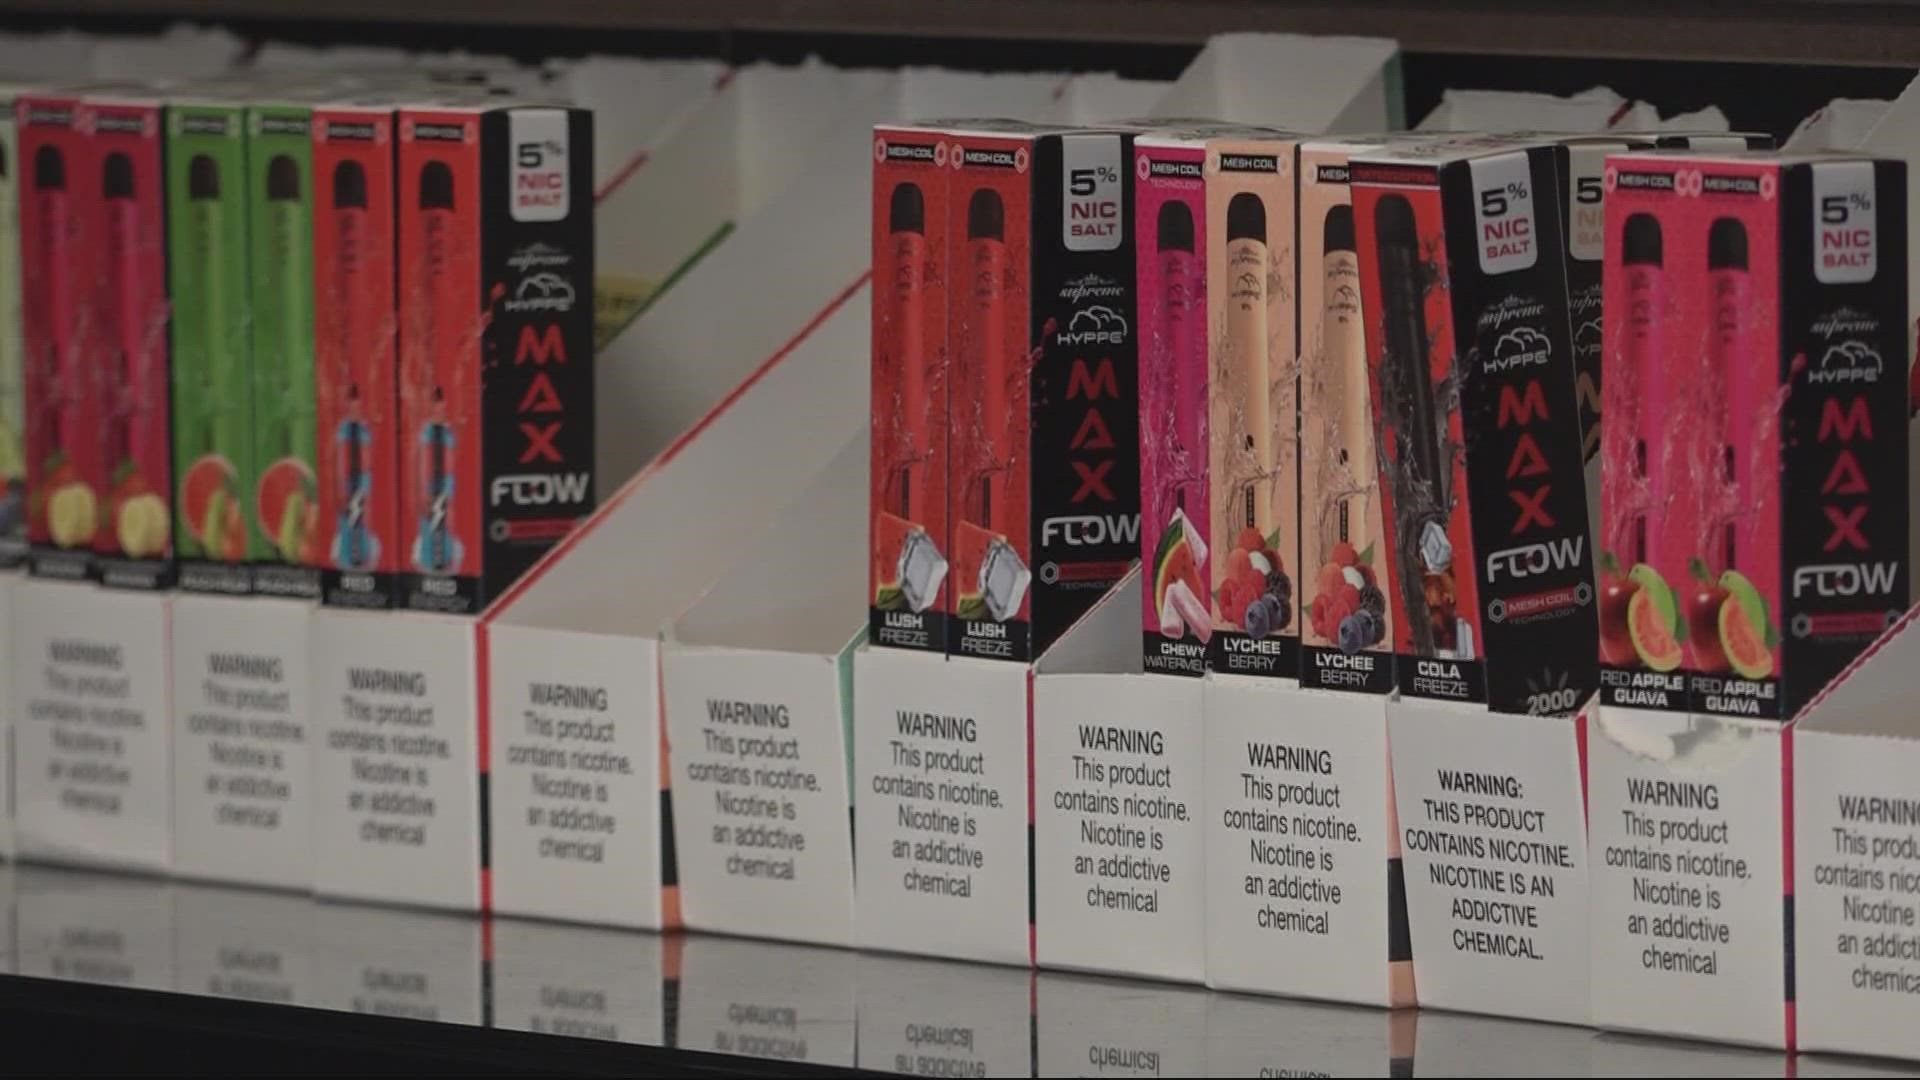 At a board of commissioners meeting on Monday, people testified for and against the proposed ban on flavored tobacco and nicotine products.